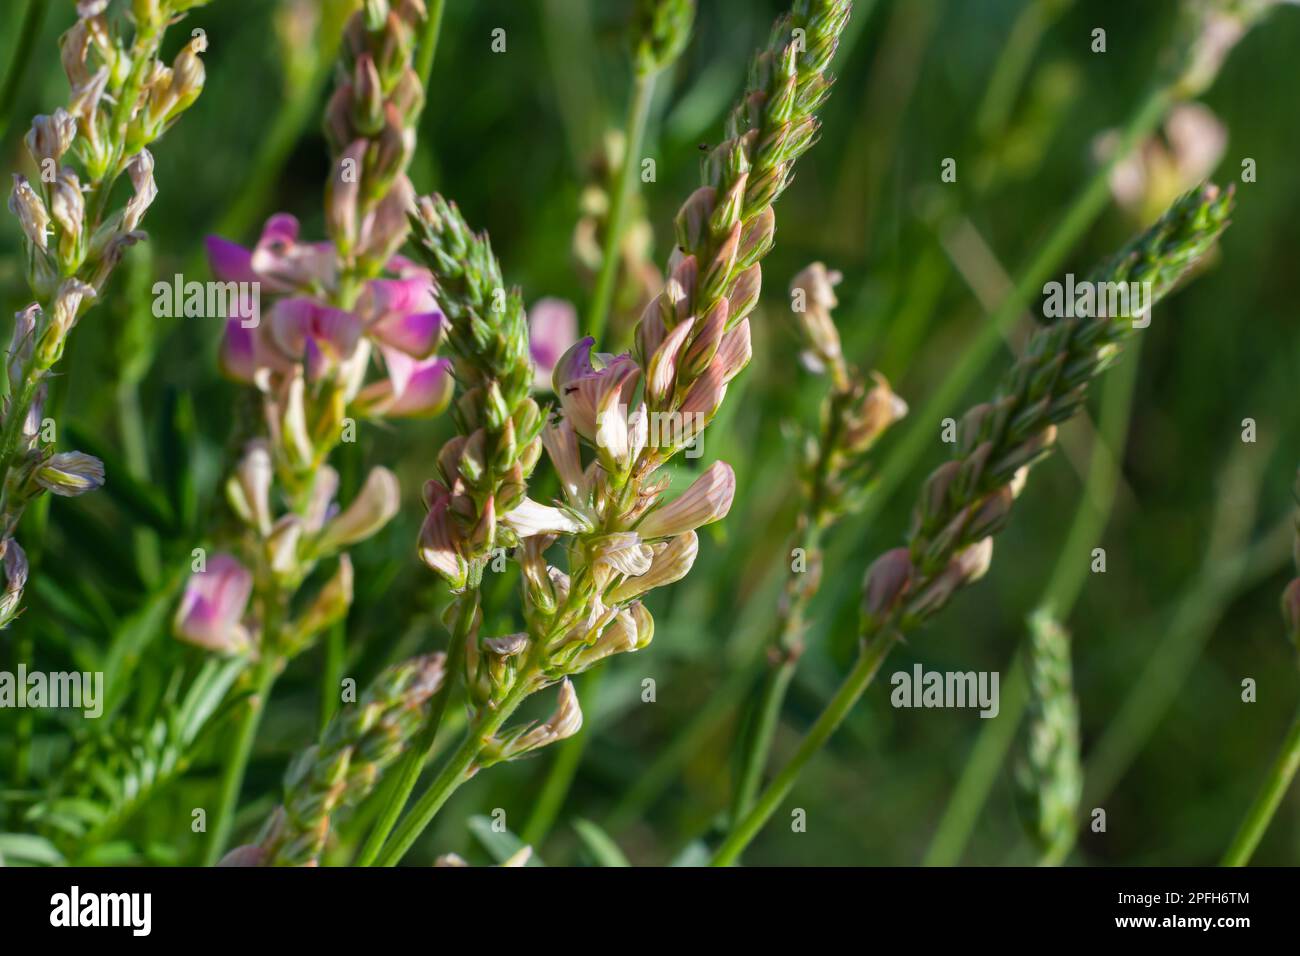 Sainfoin Onobrychis viciifolia, growing in the grassland. Common sainfoin fowering in summer. Stock Photo